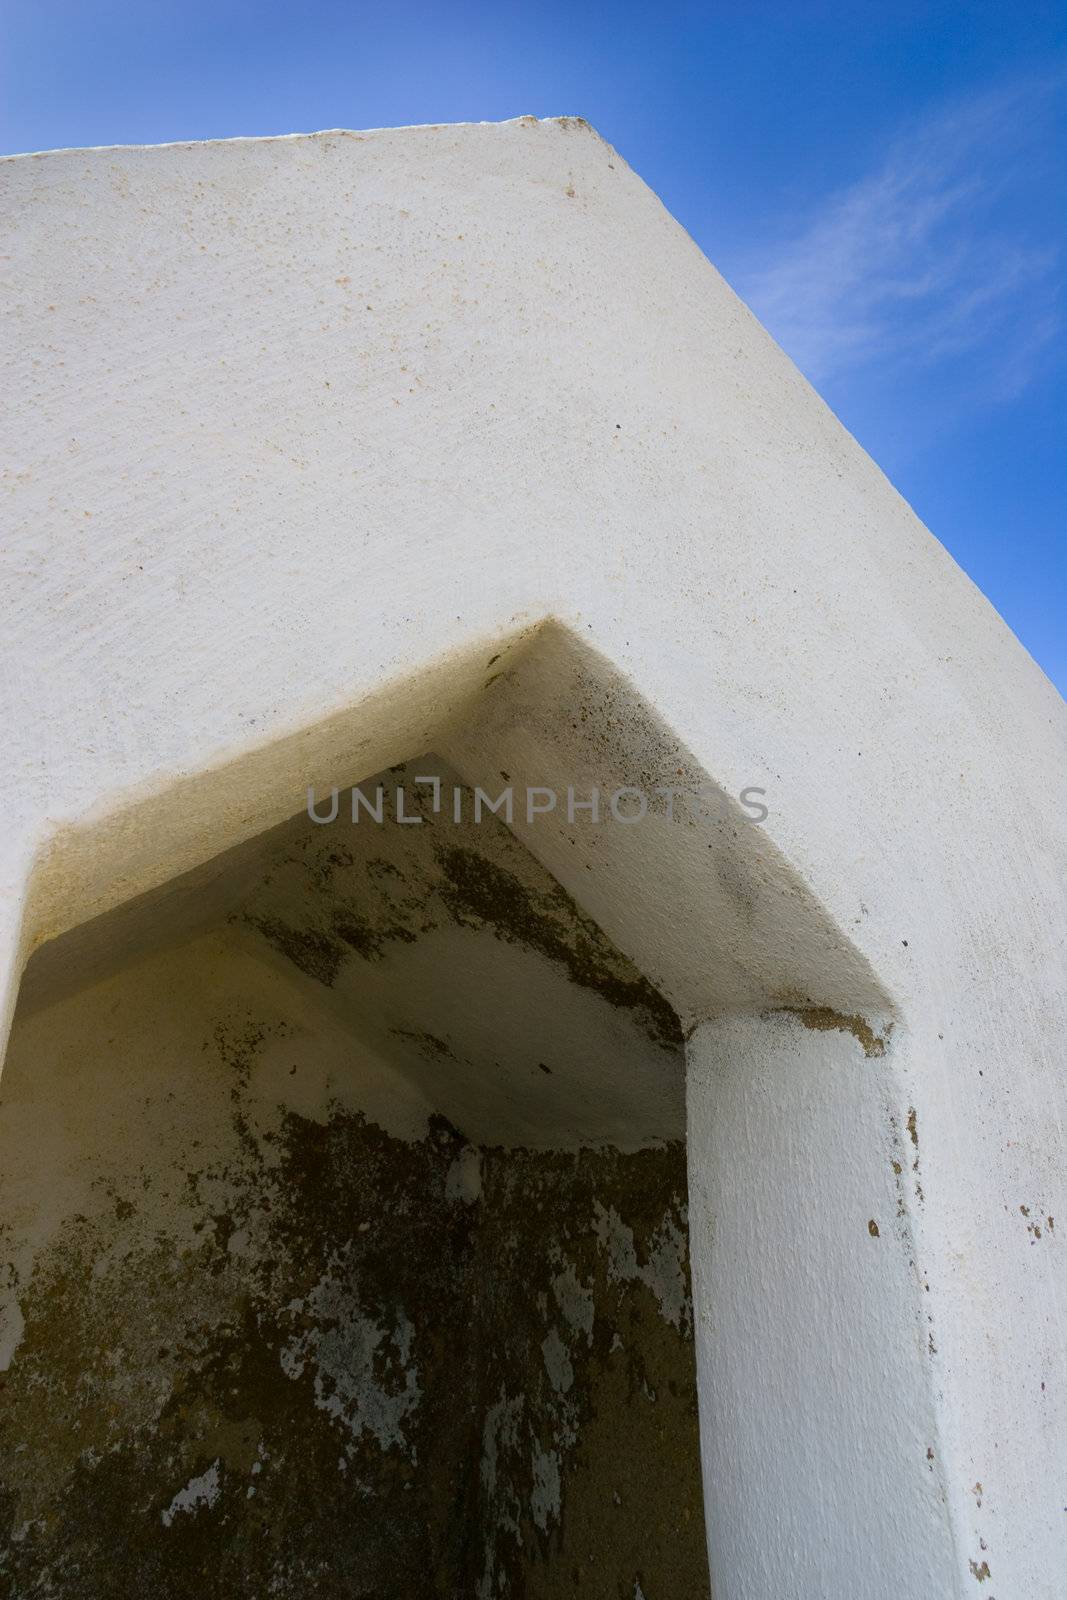 A guard shelter on one of the fort walls, at the Fortaleza de Sagres, Portugal.